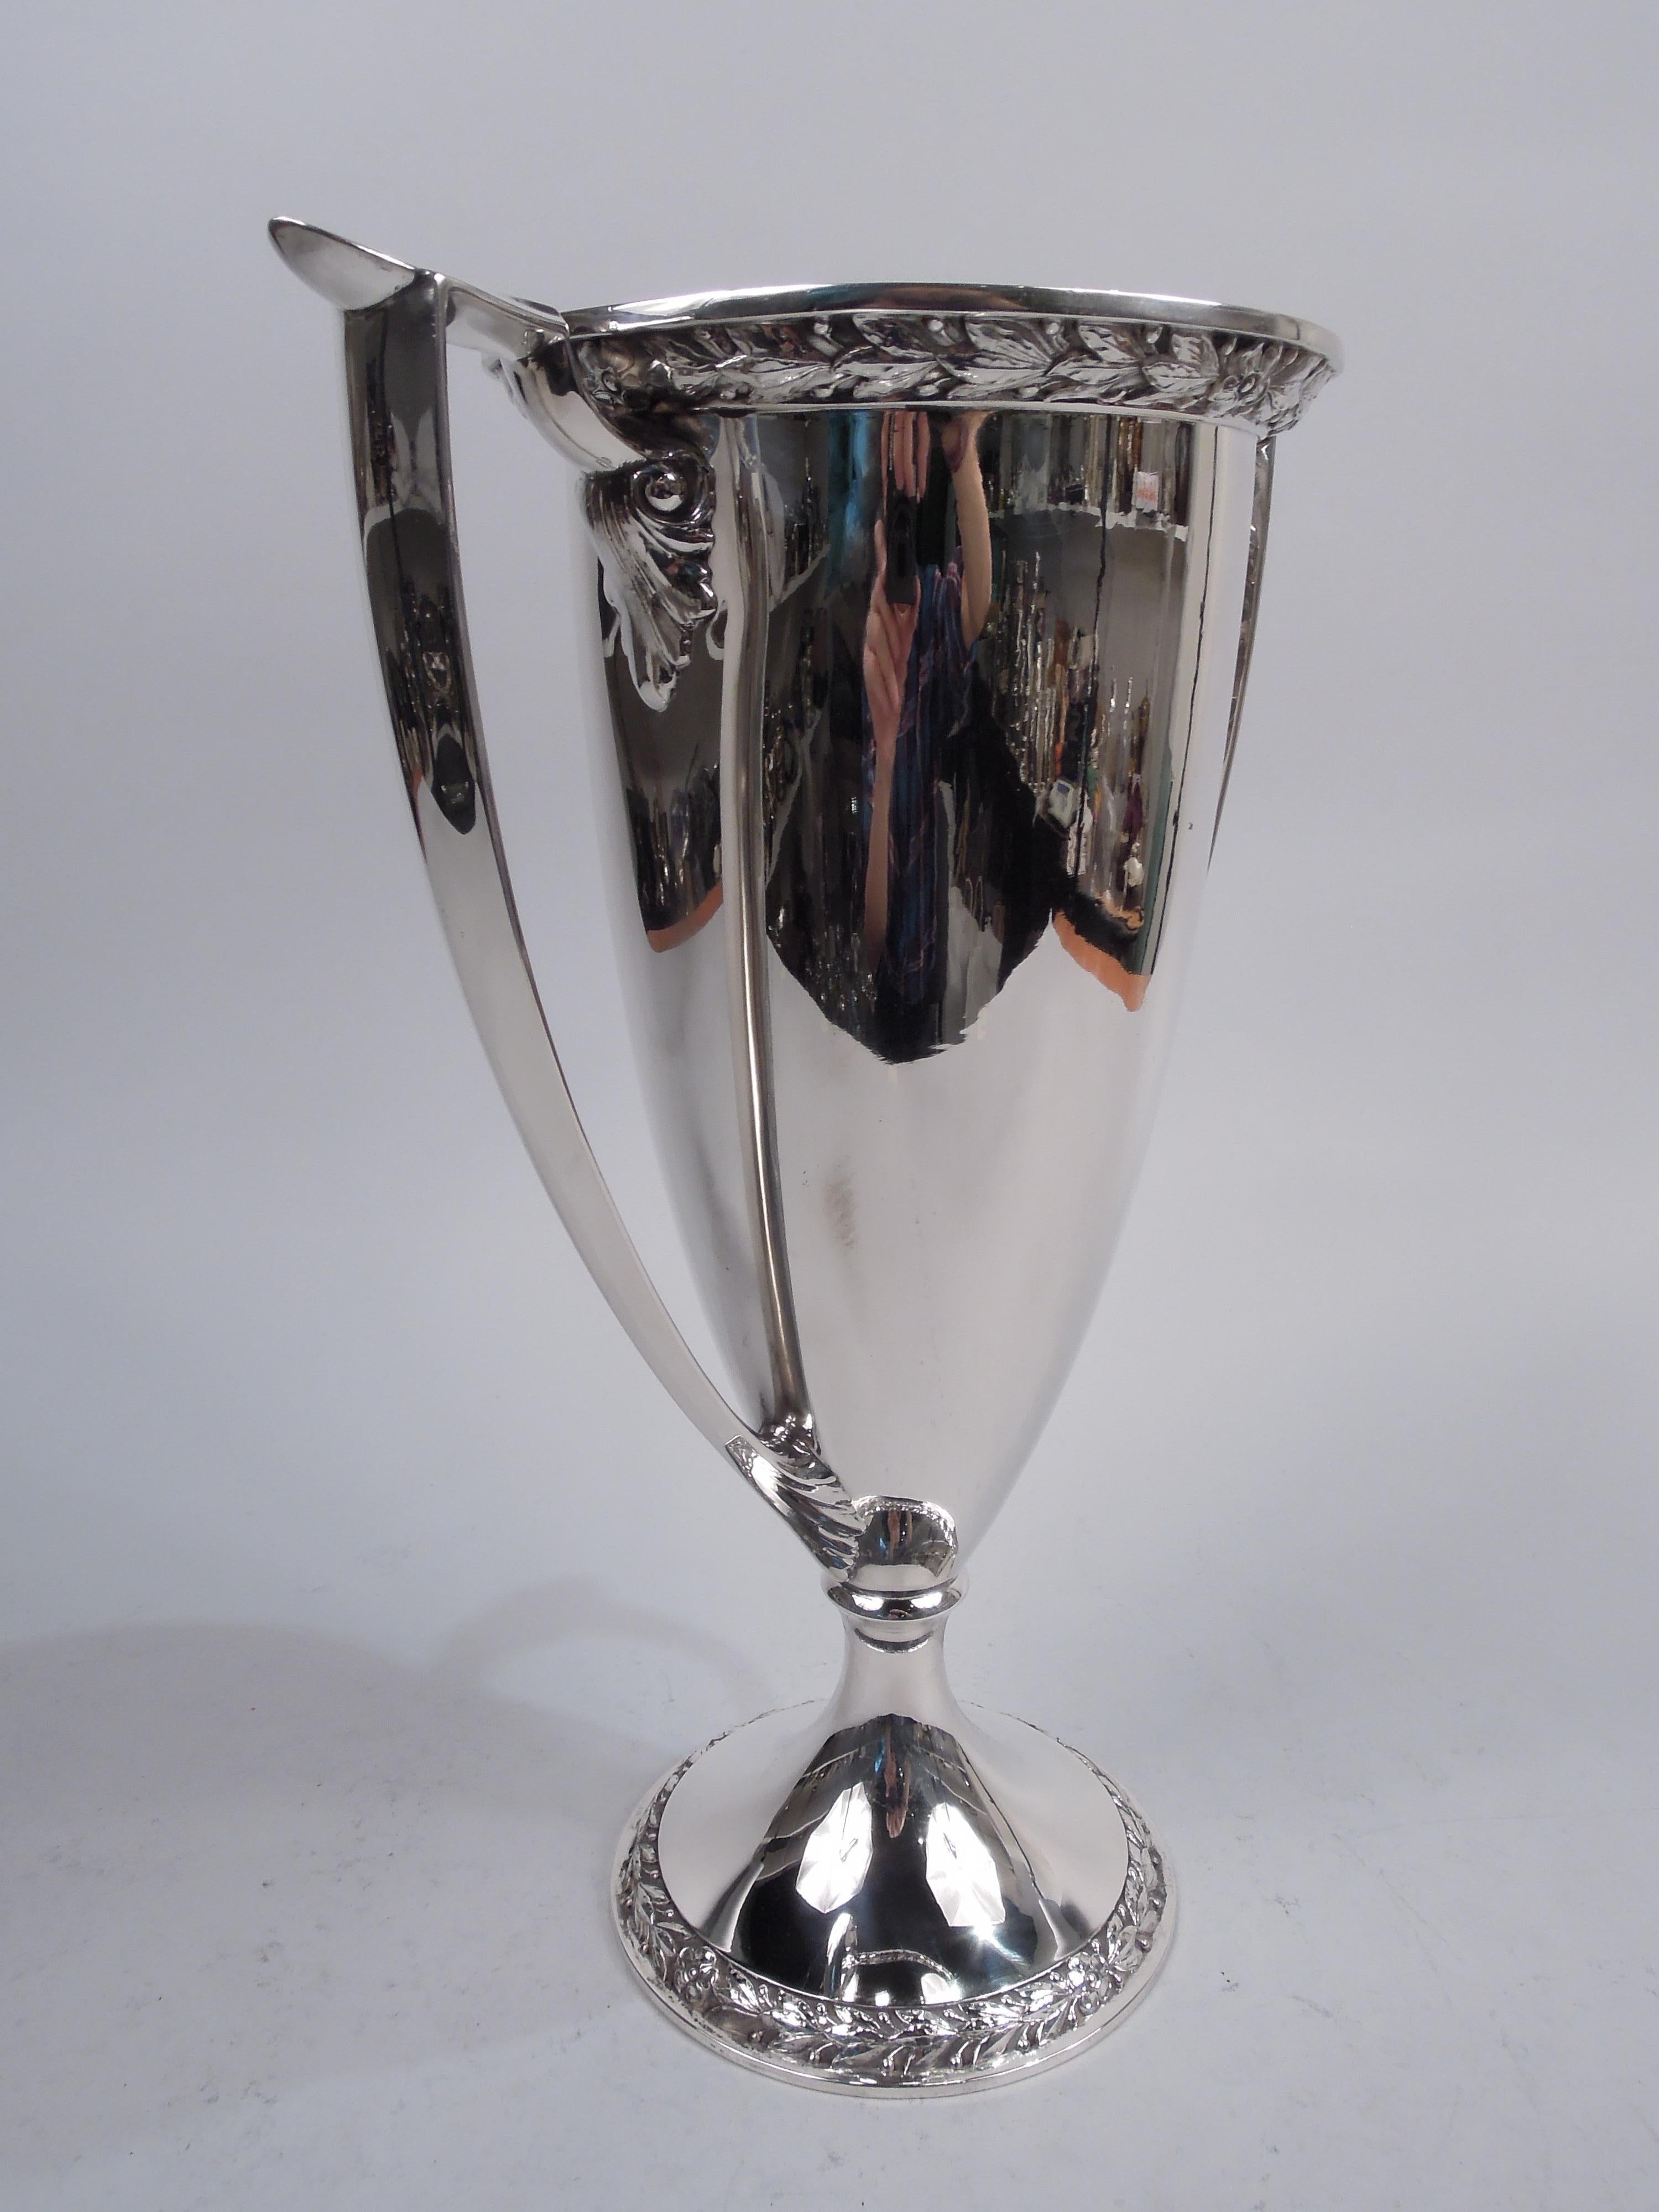 Edwardian Classical sterling silver trophy cup. Made by Gorham in Providence, ca 1910. Tall and tapering bowl with flat mouth rim on domed foot. Capped and leaf-mounted scroll-bracket side handles. Imbricated leaf and flower border applied to mouth